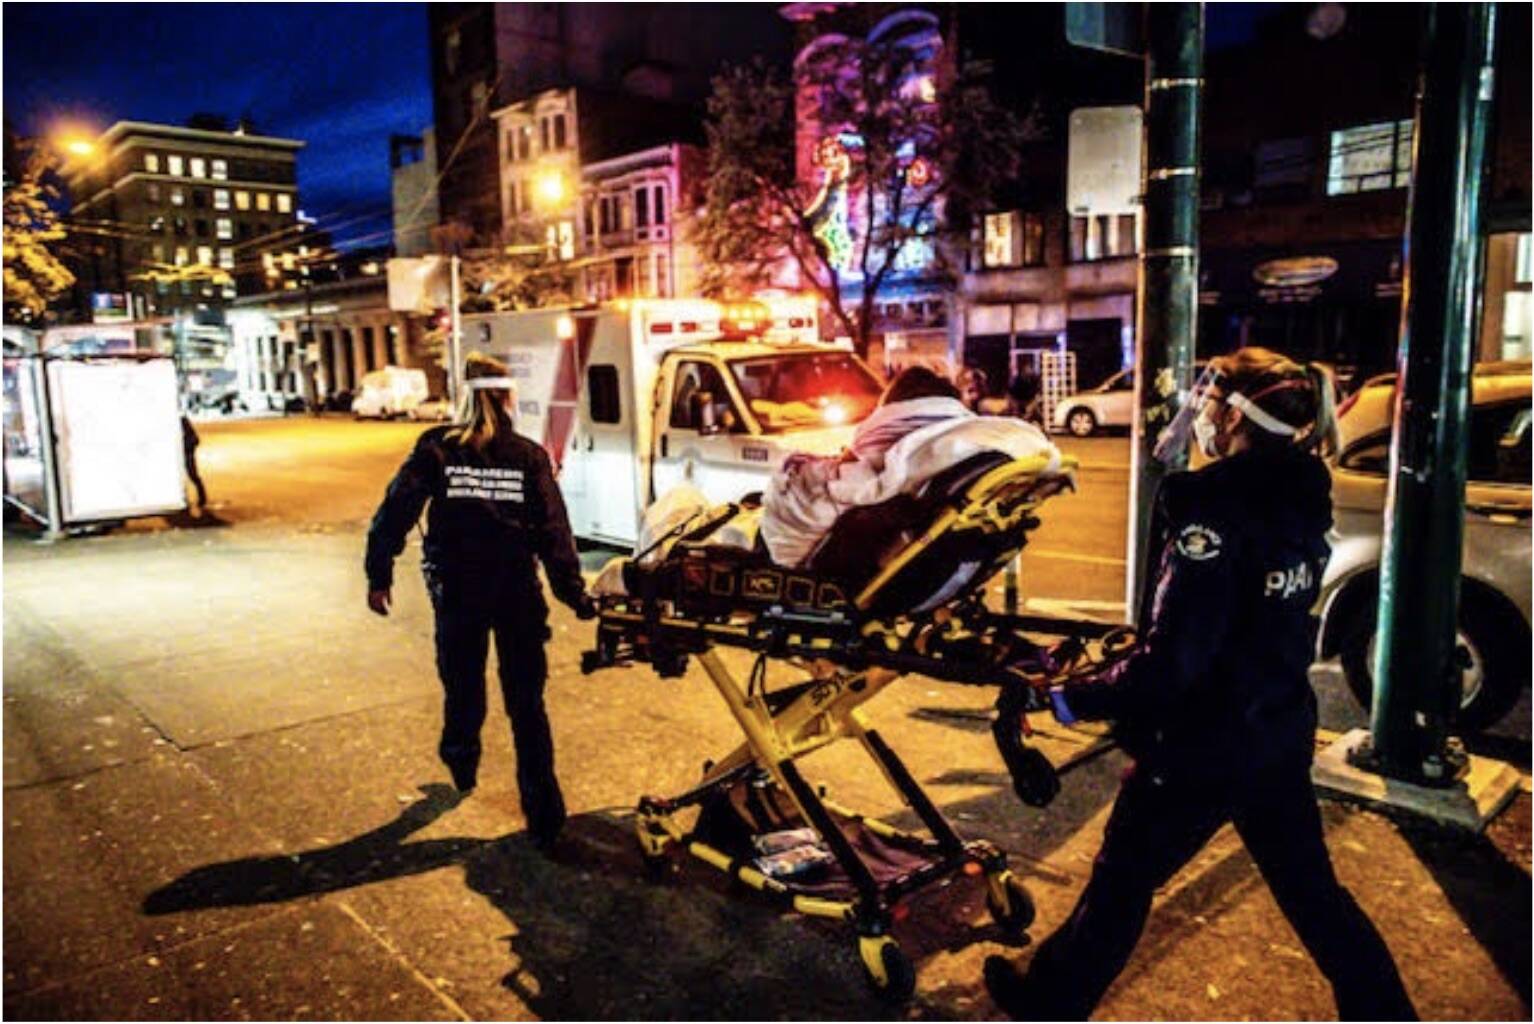 The Union of B.C. Municipalities wants B.C.’s hospitals, emergency rooms, and ambulance services are open and available to 24 hours a day. Josh Berson photo